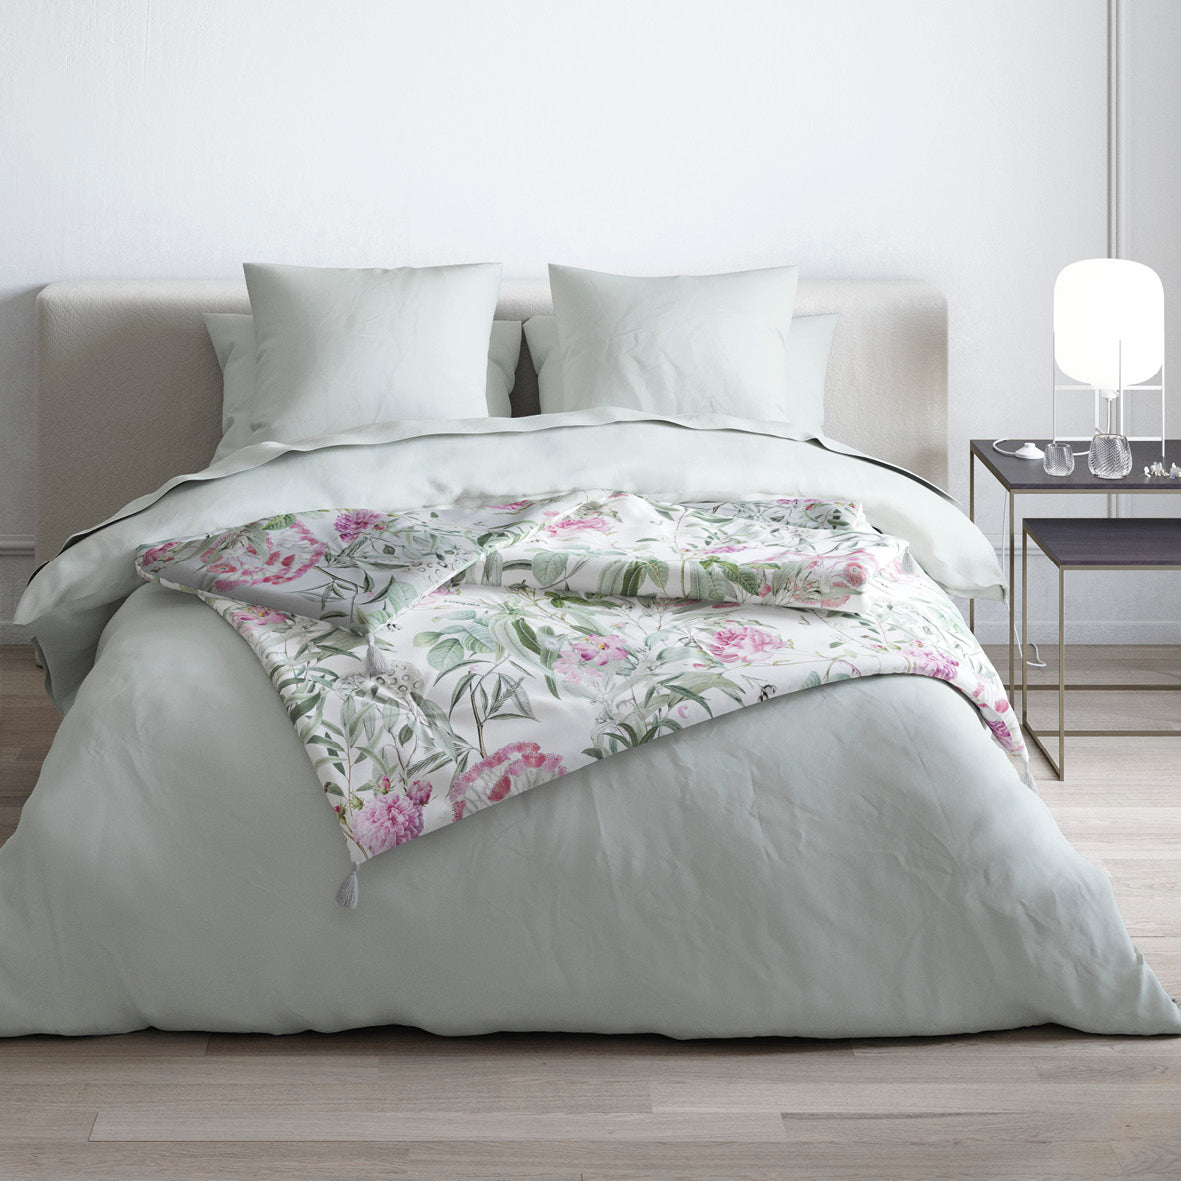 Quilt with tassels - Jardin de roses White/Thyme green